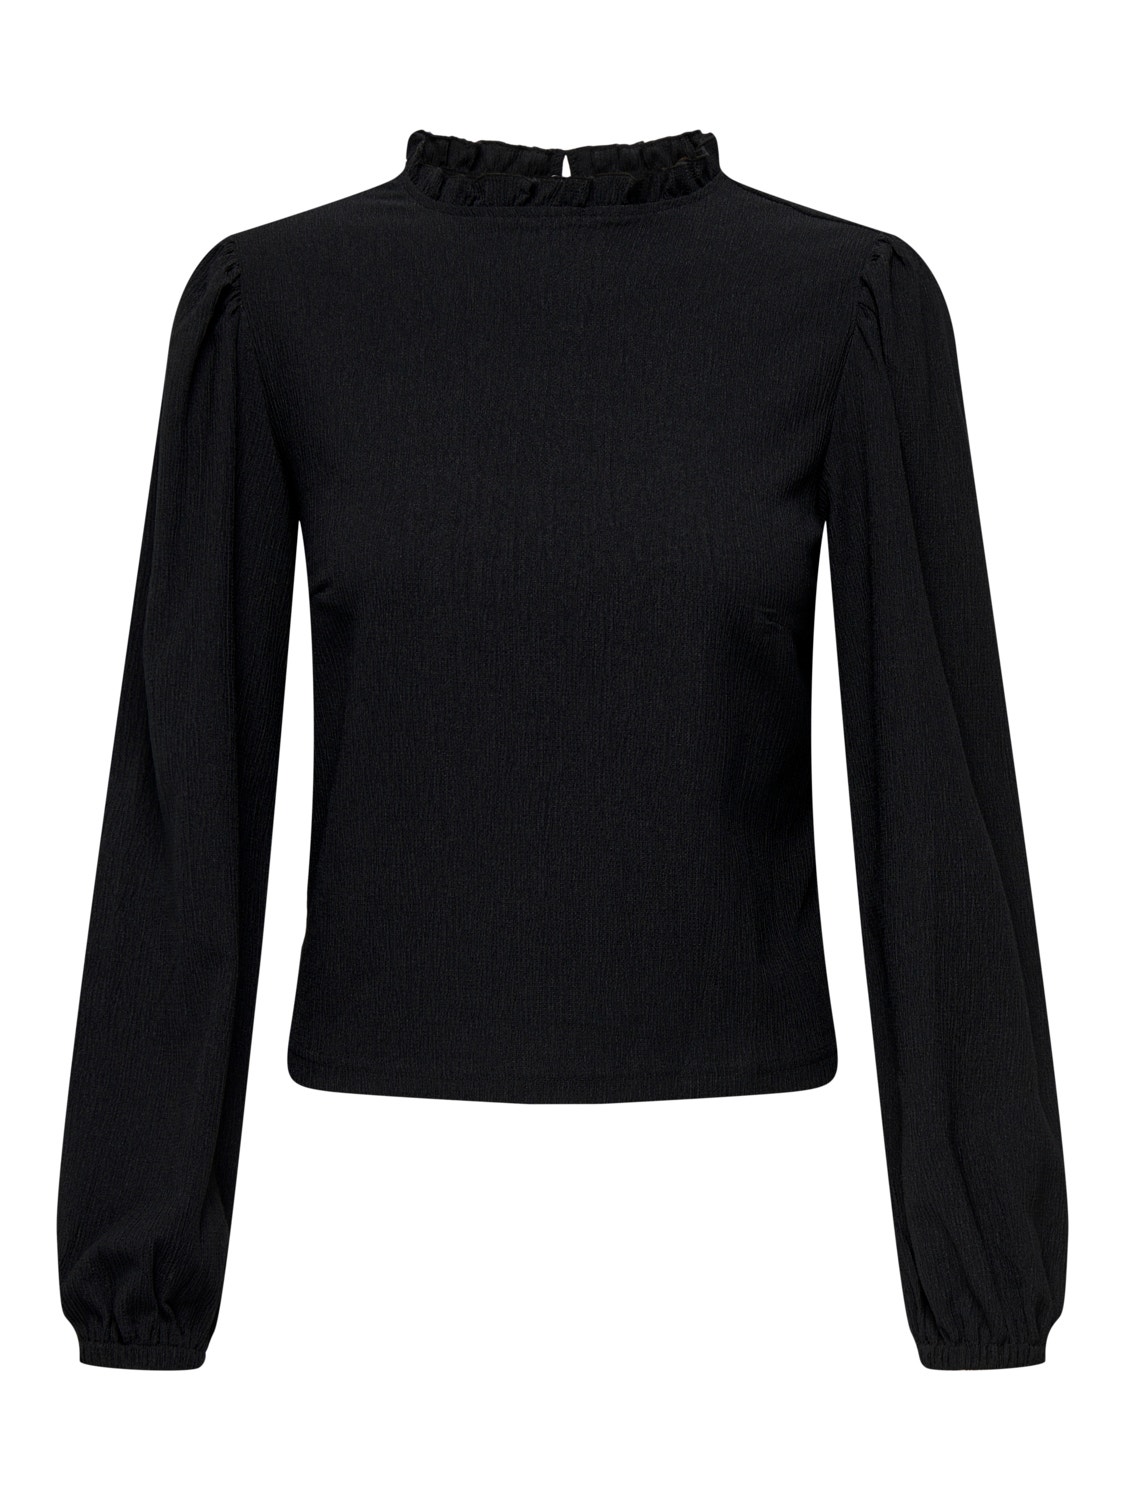 ONLY Top with long sleeves and high neck -Black - 15300749